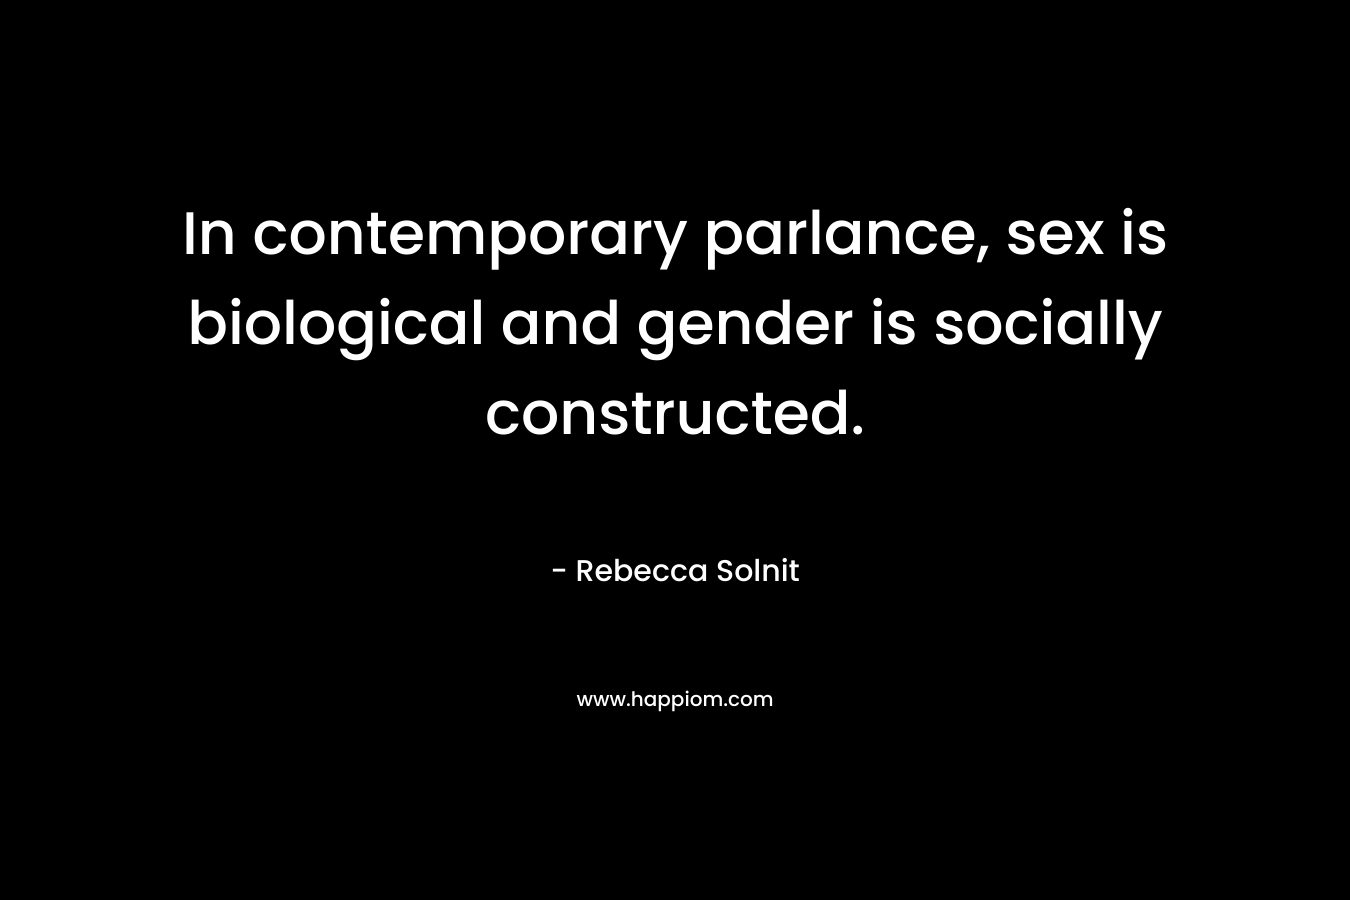 In contemporary parlance, sex is biological and gender is socially constructed. – Rebecca Solnit